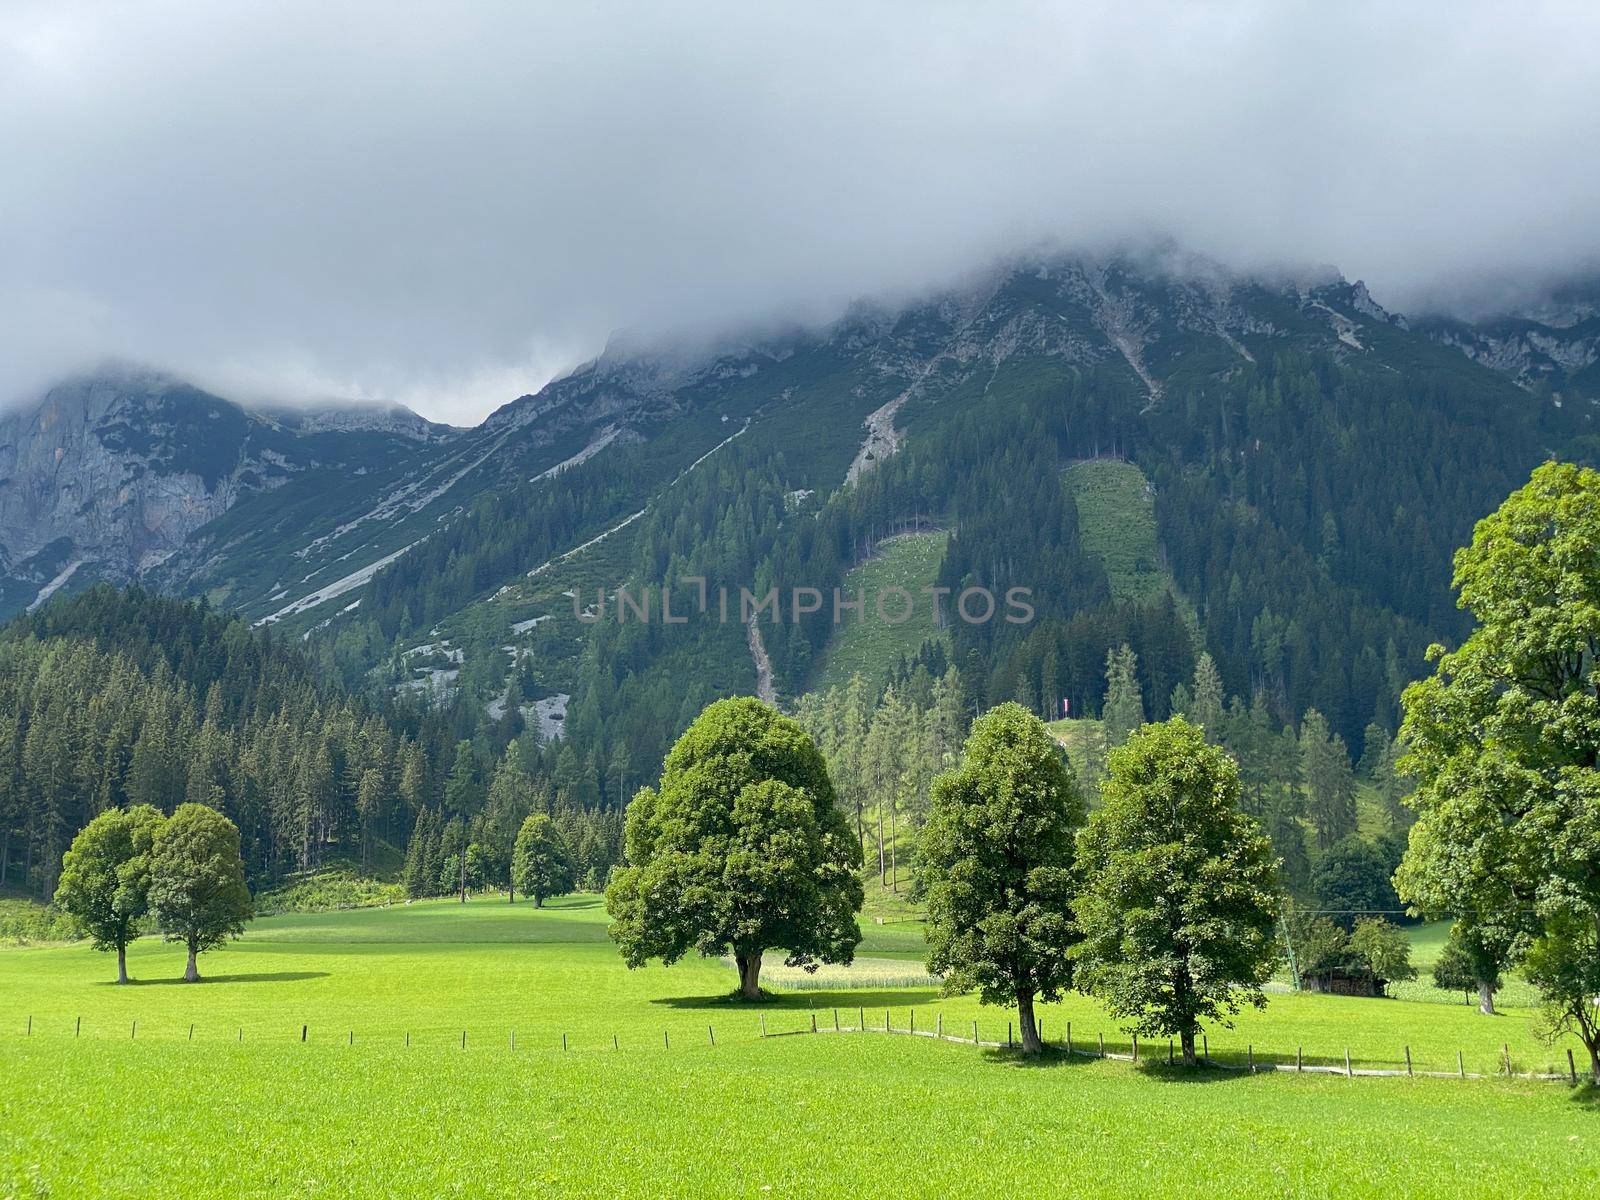 Landscape in Ramsau am Dachstein, Austria. This wonderful area of alpine pastures at the foot of the imposing south wall of Dachstein offers many hiking and amazing lookout points.